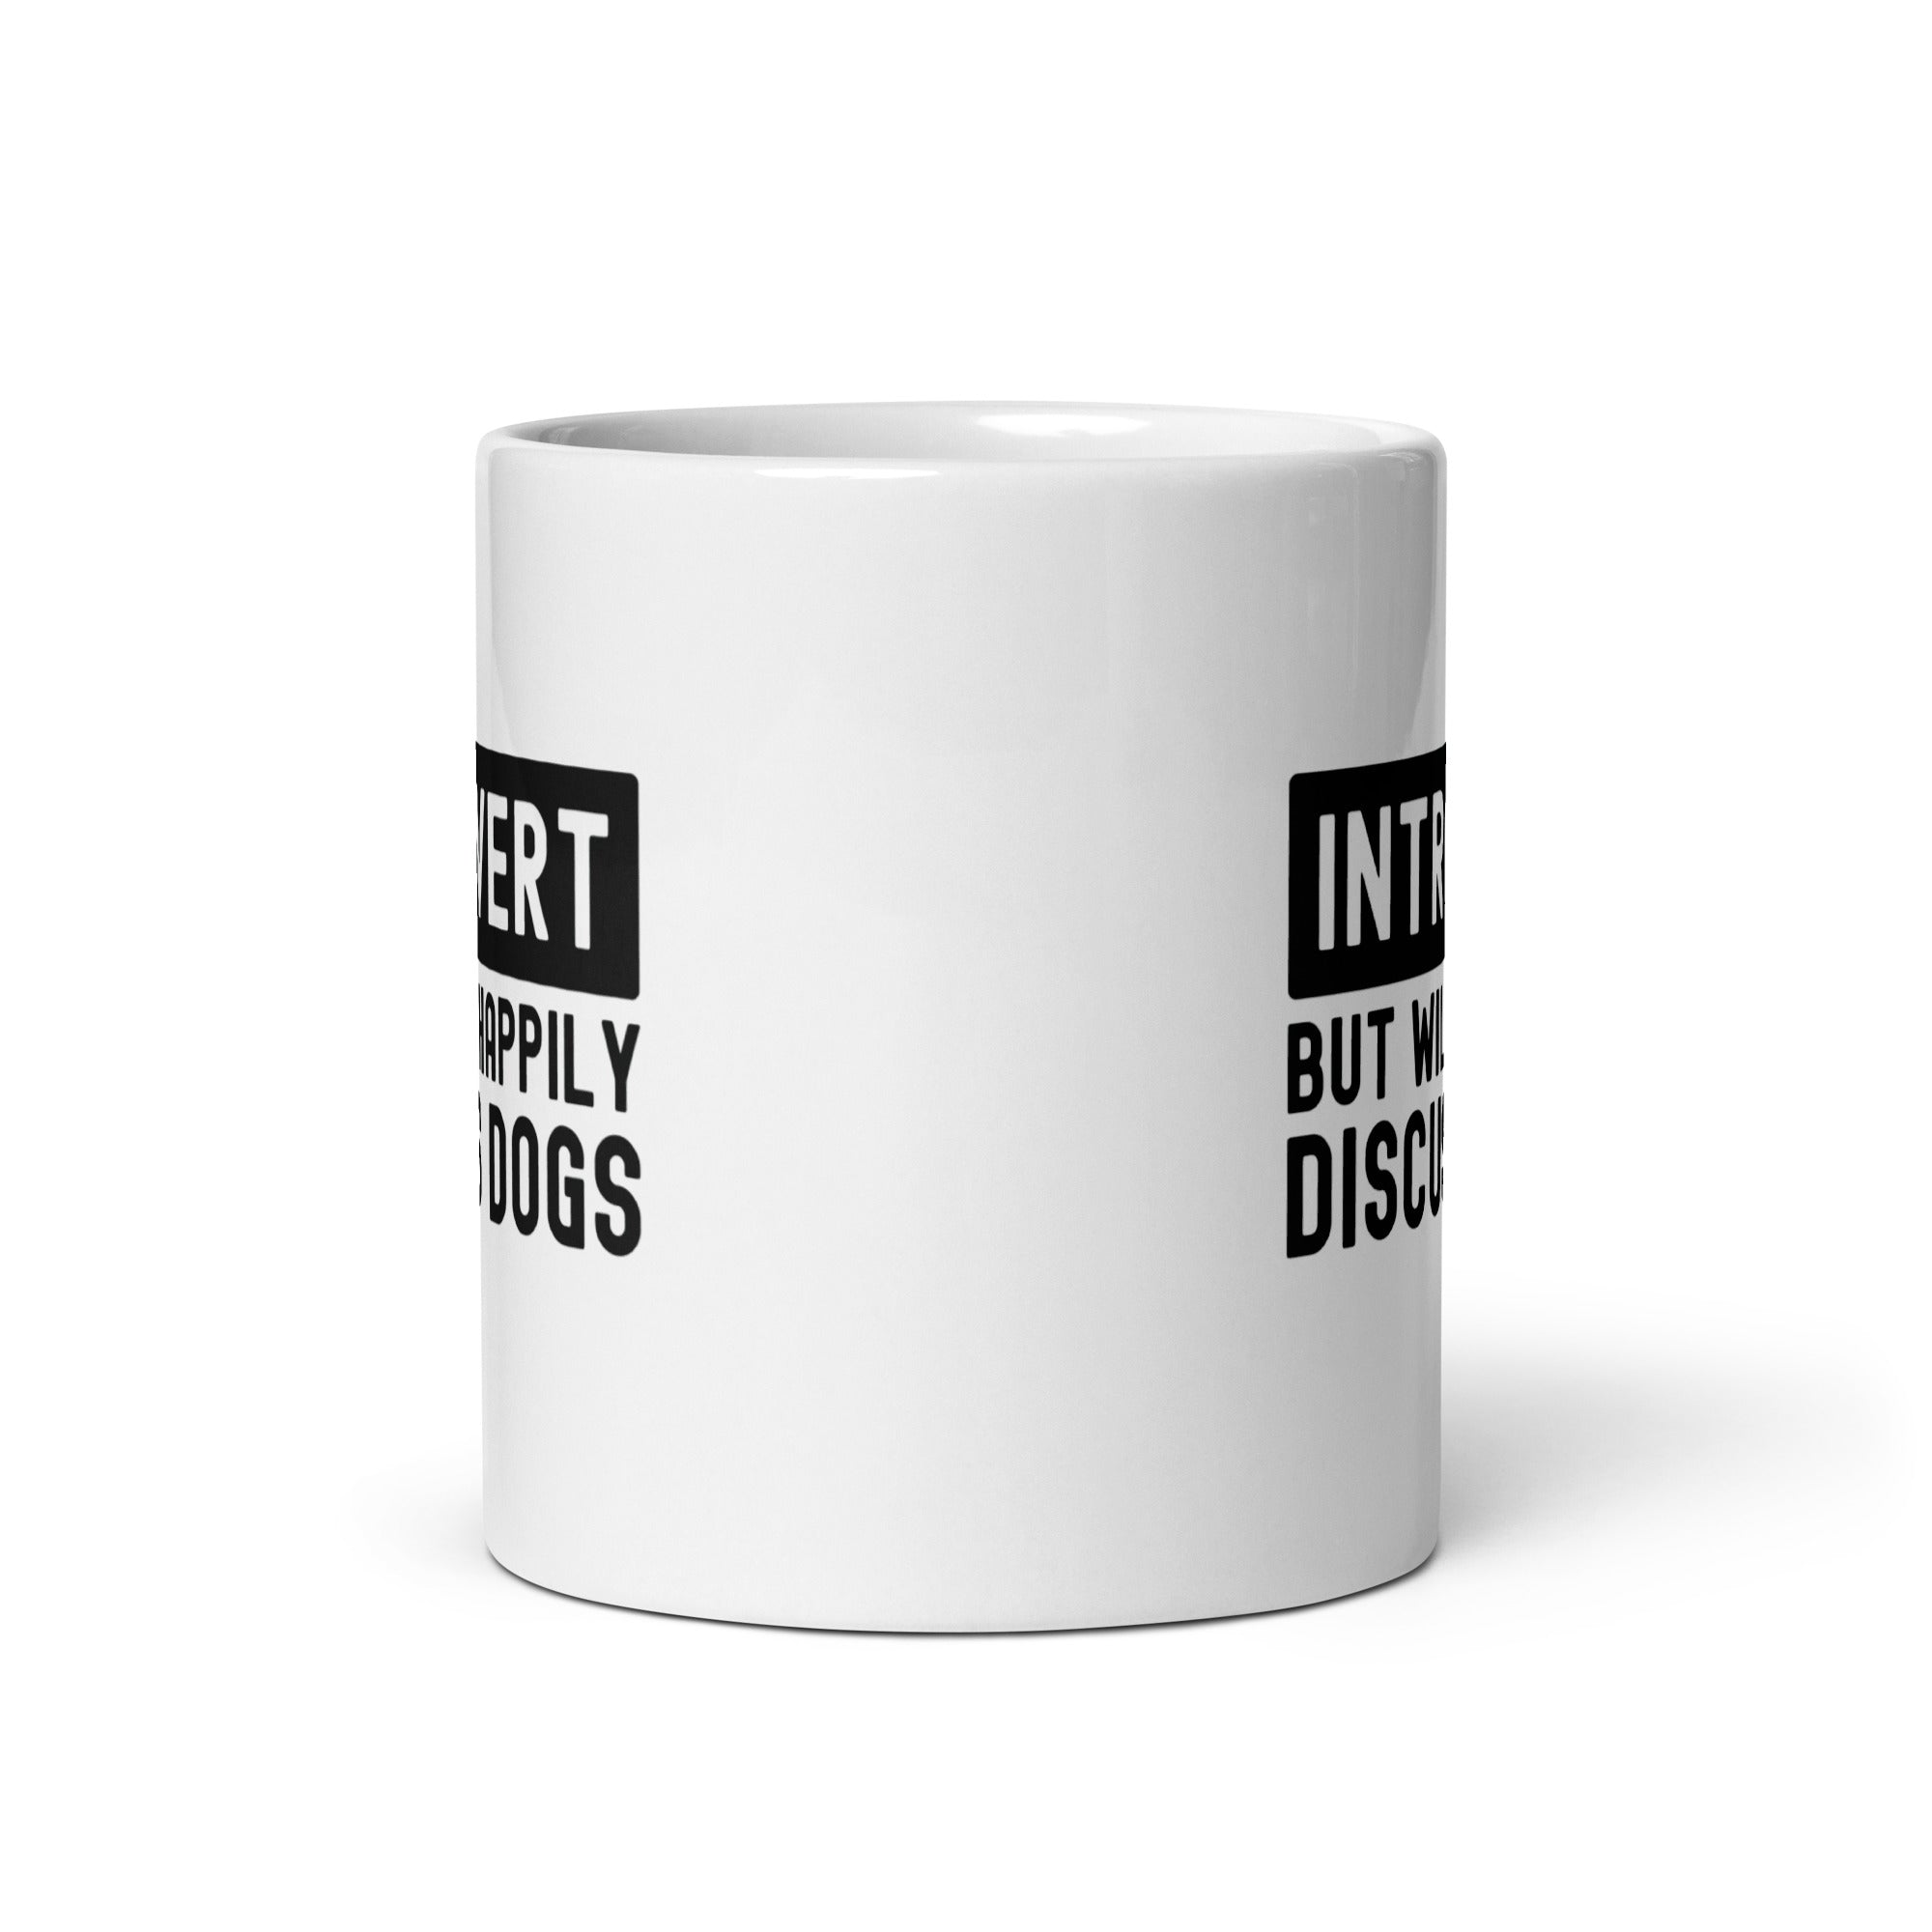 White glossy mug | Introvert But Will Happily Discuss Dogs